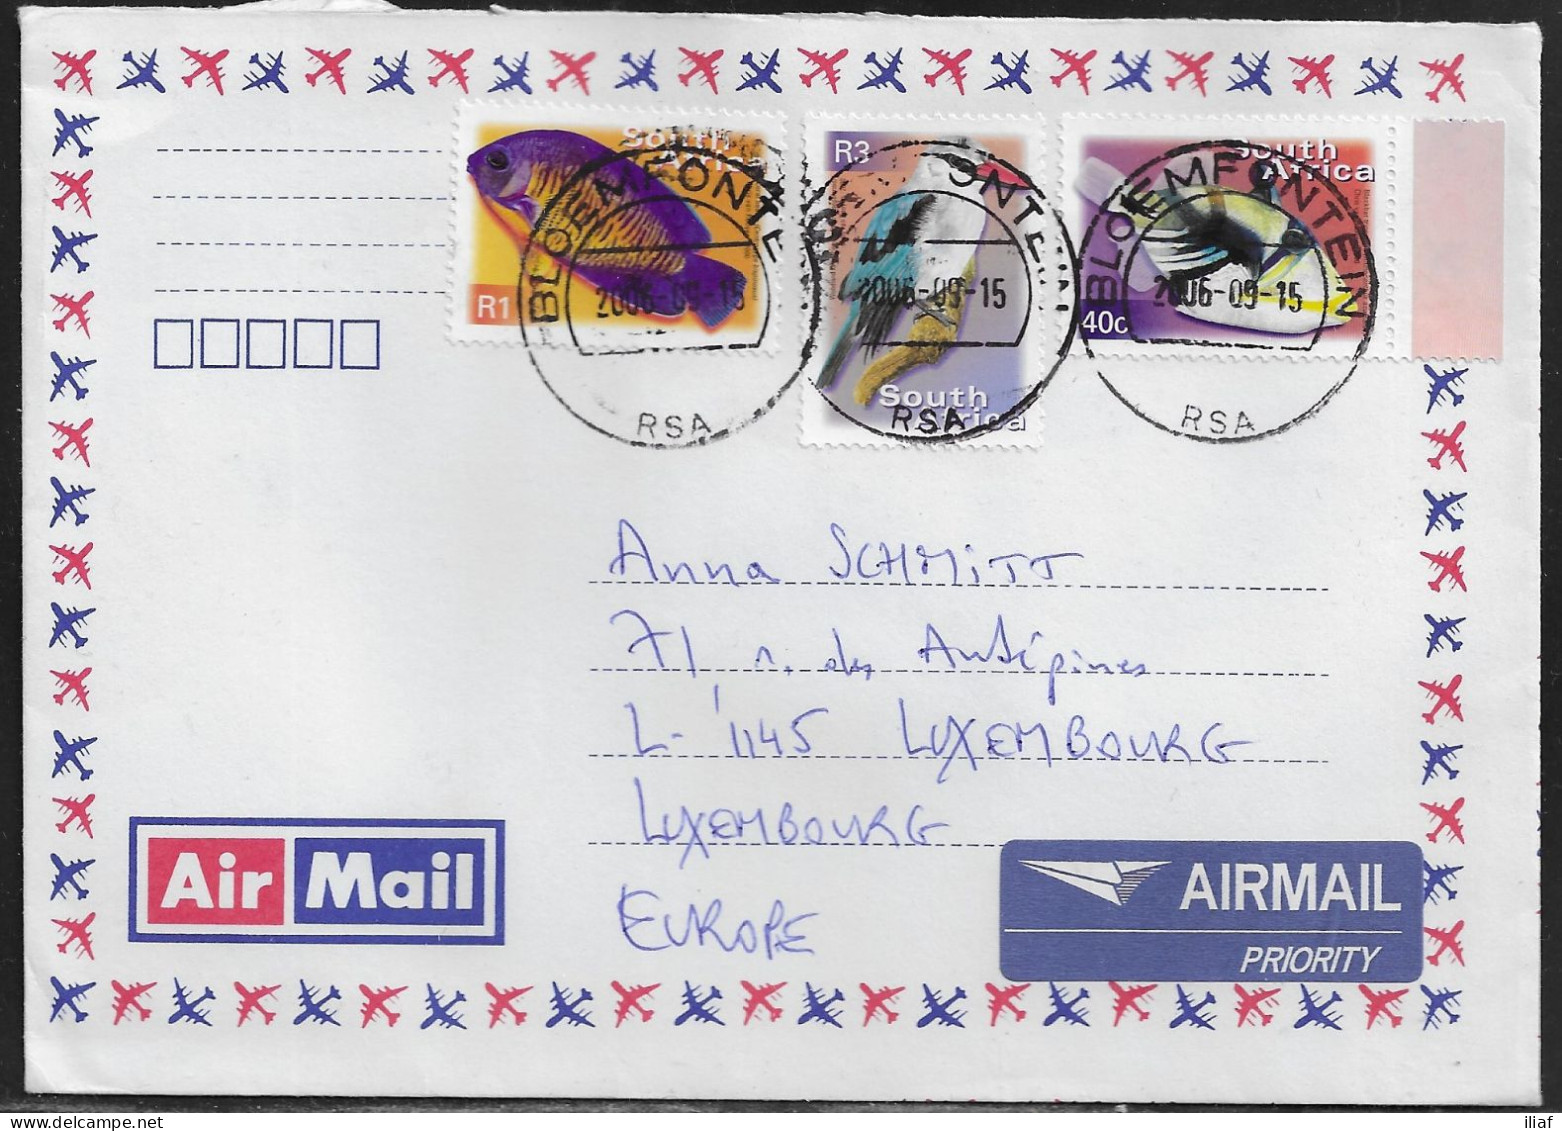 South Africa. Stamps Sc. 1177, 1183, 1194 On Air Mail Letter, Sent From South Africa At 15.09.2006 To Luxembourg. - Covers & Documents